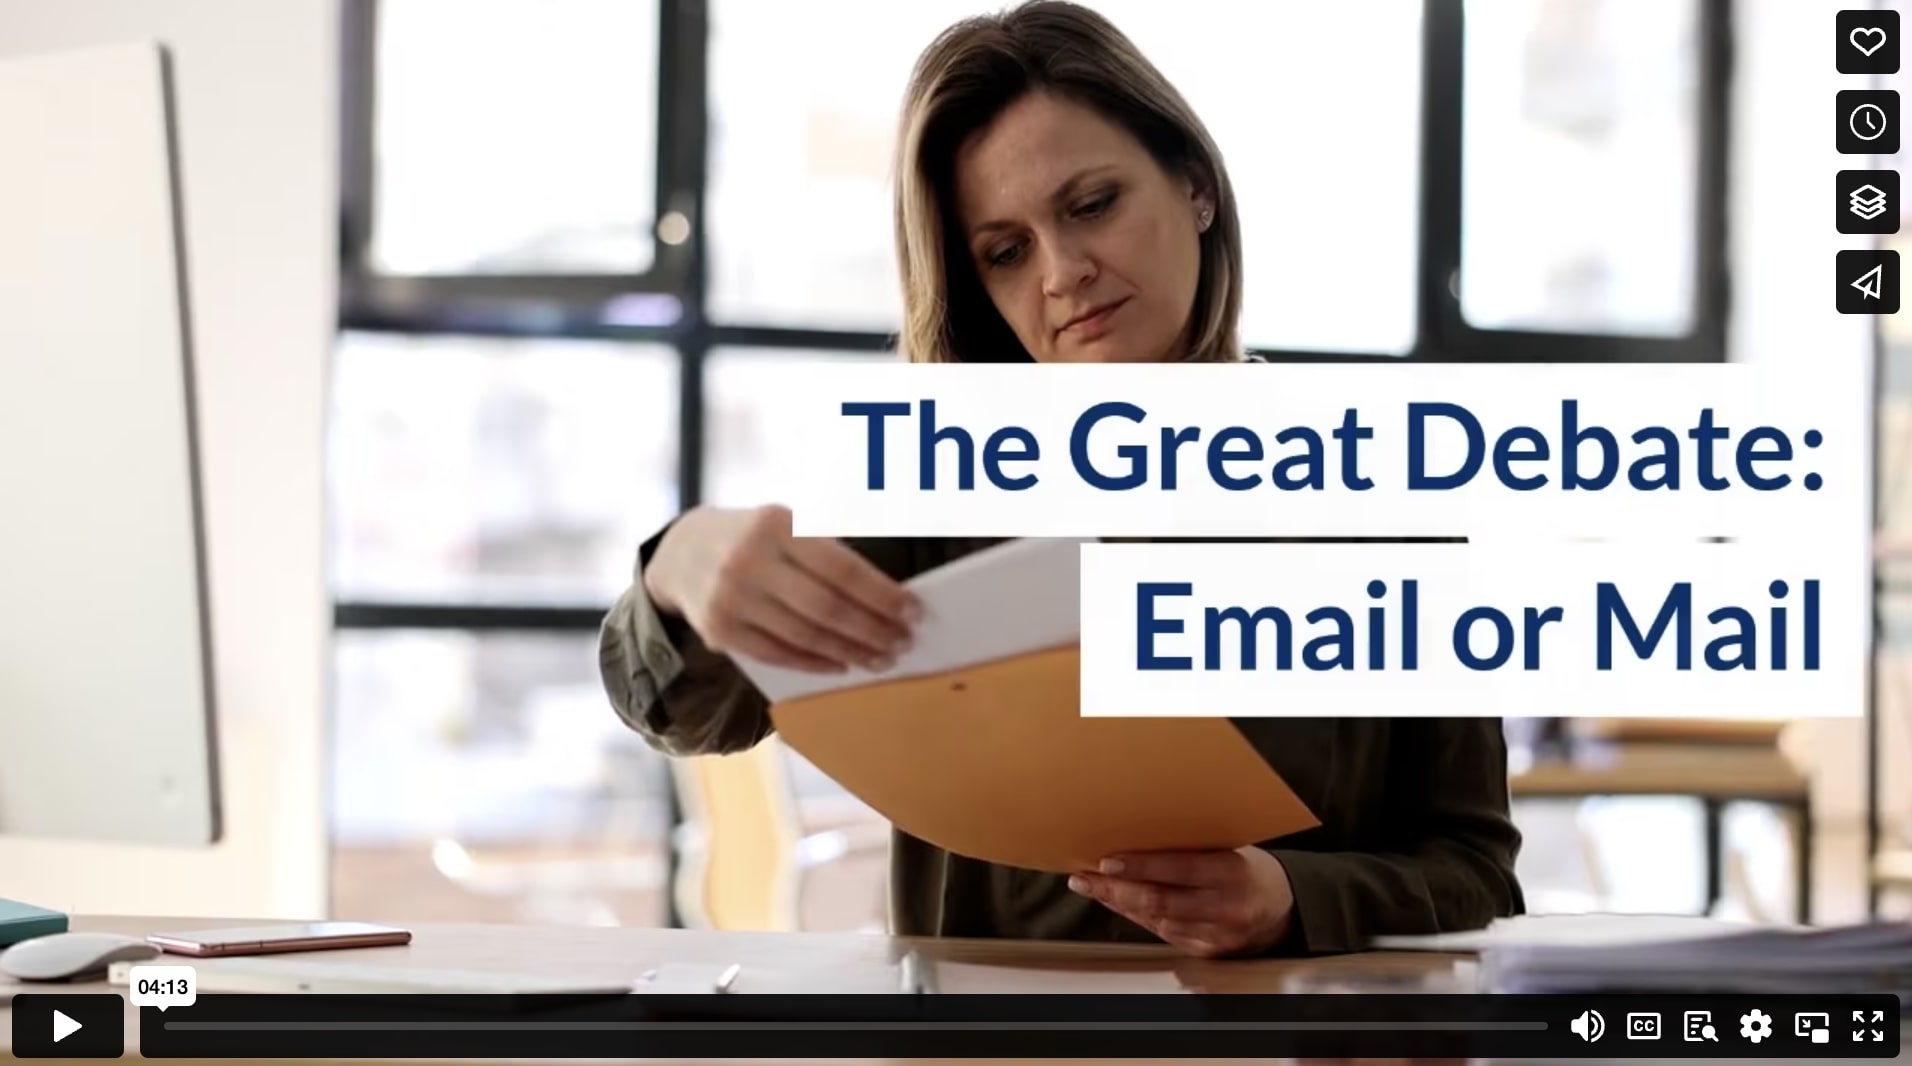 The Great Debate: Email or Mail